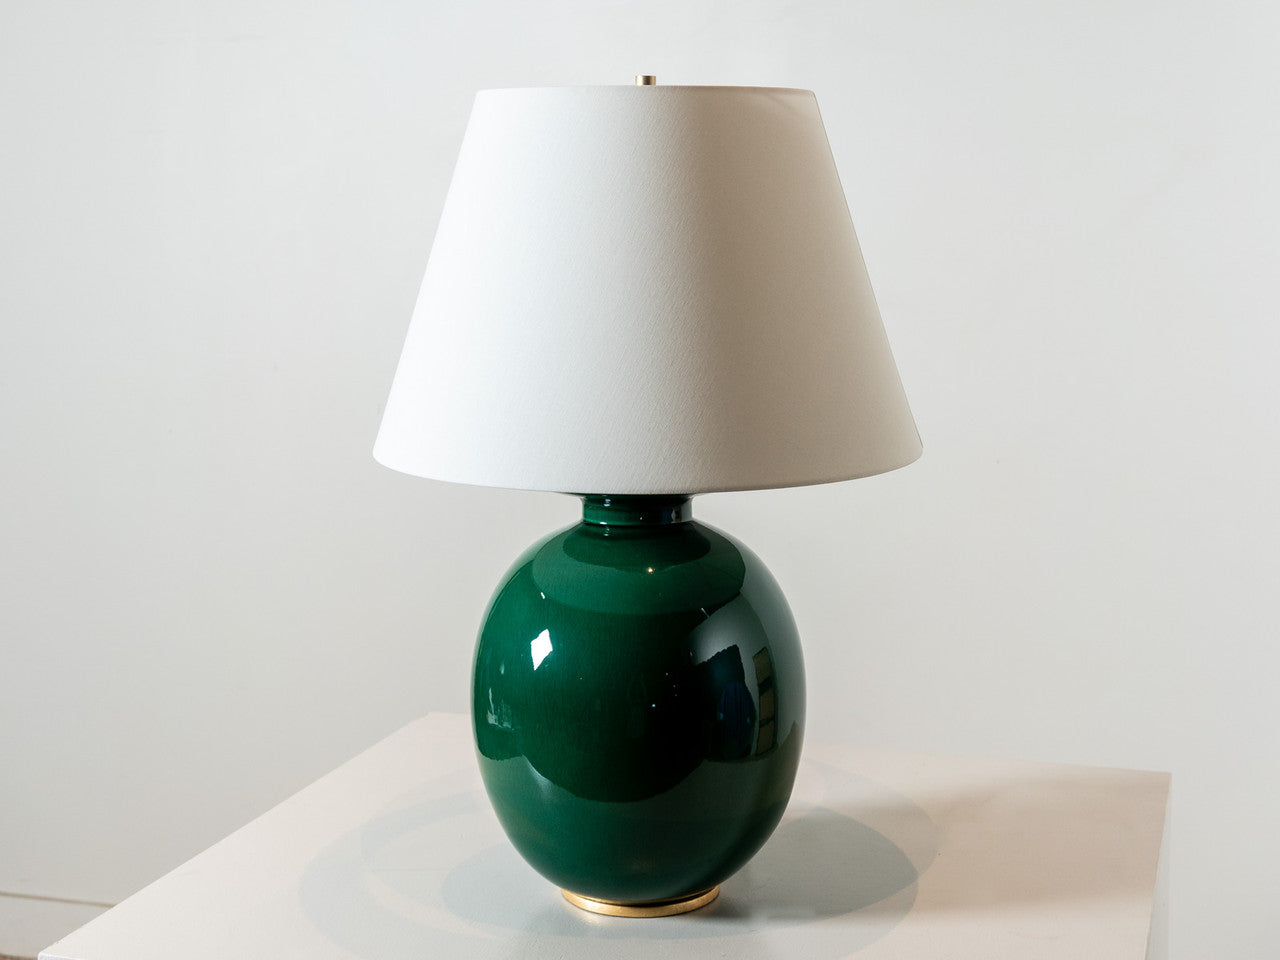 Hans Medium Table Lamp in Celtic Green Crackle with Linen Shade